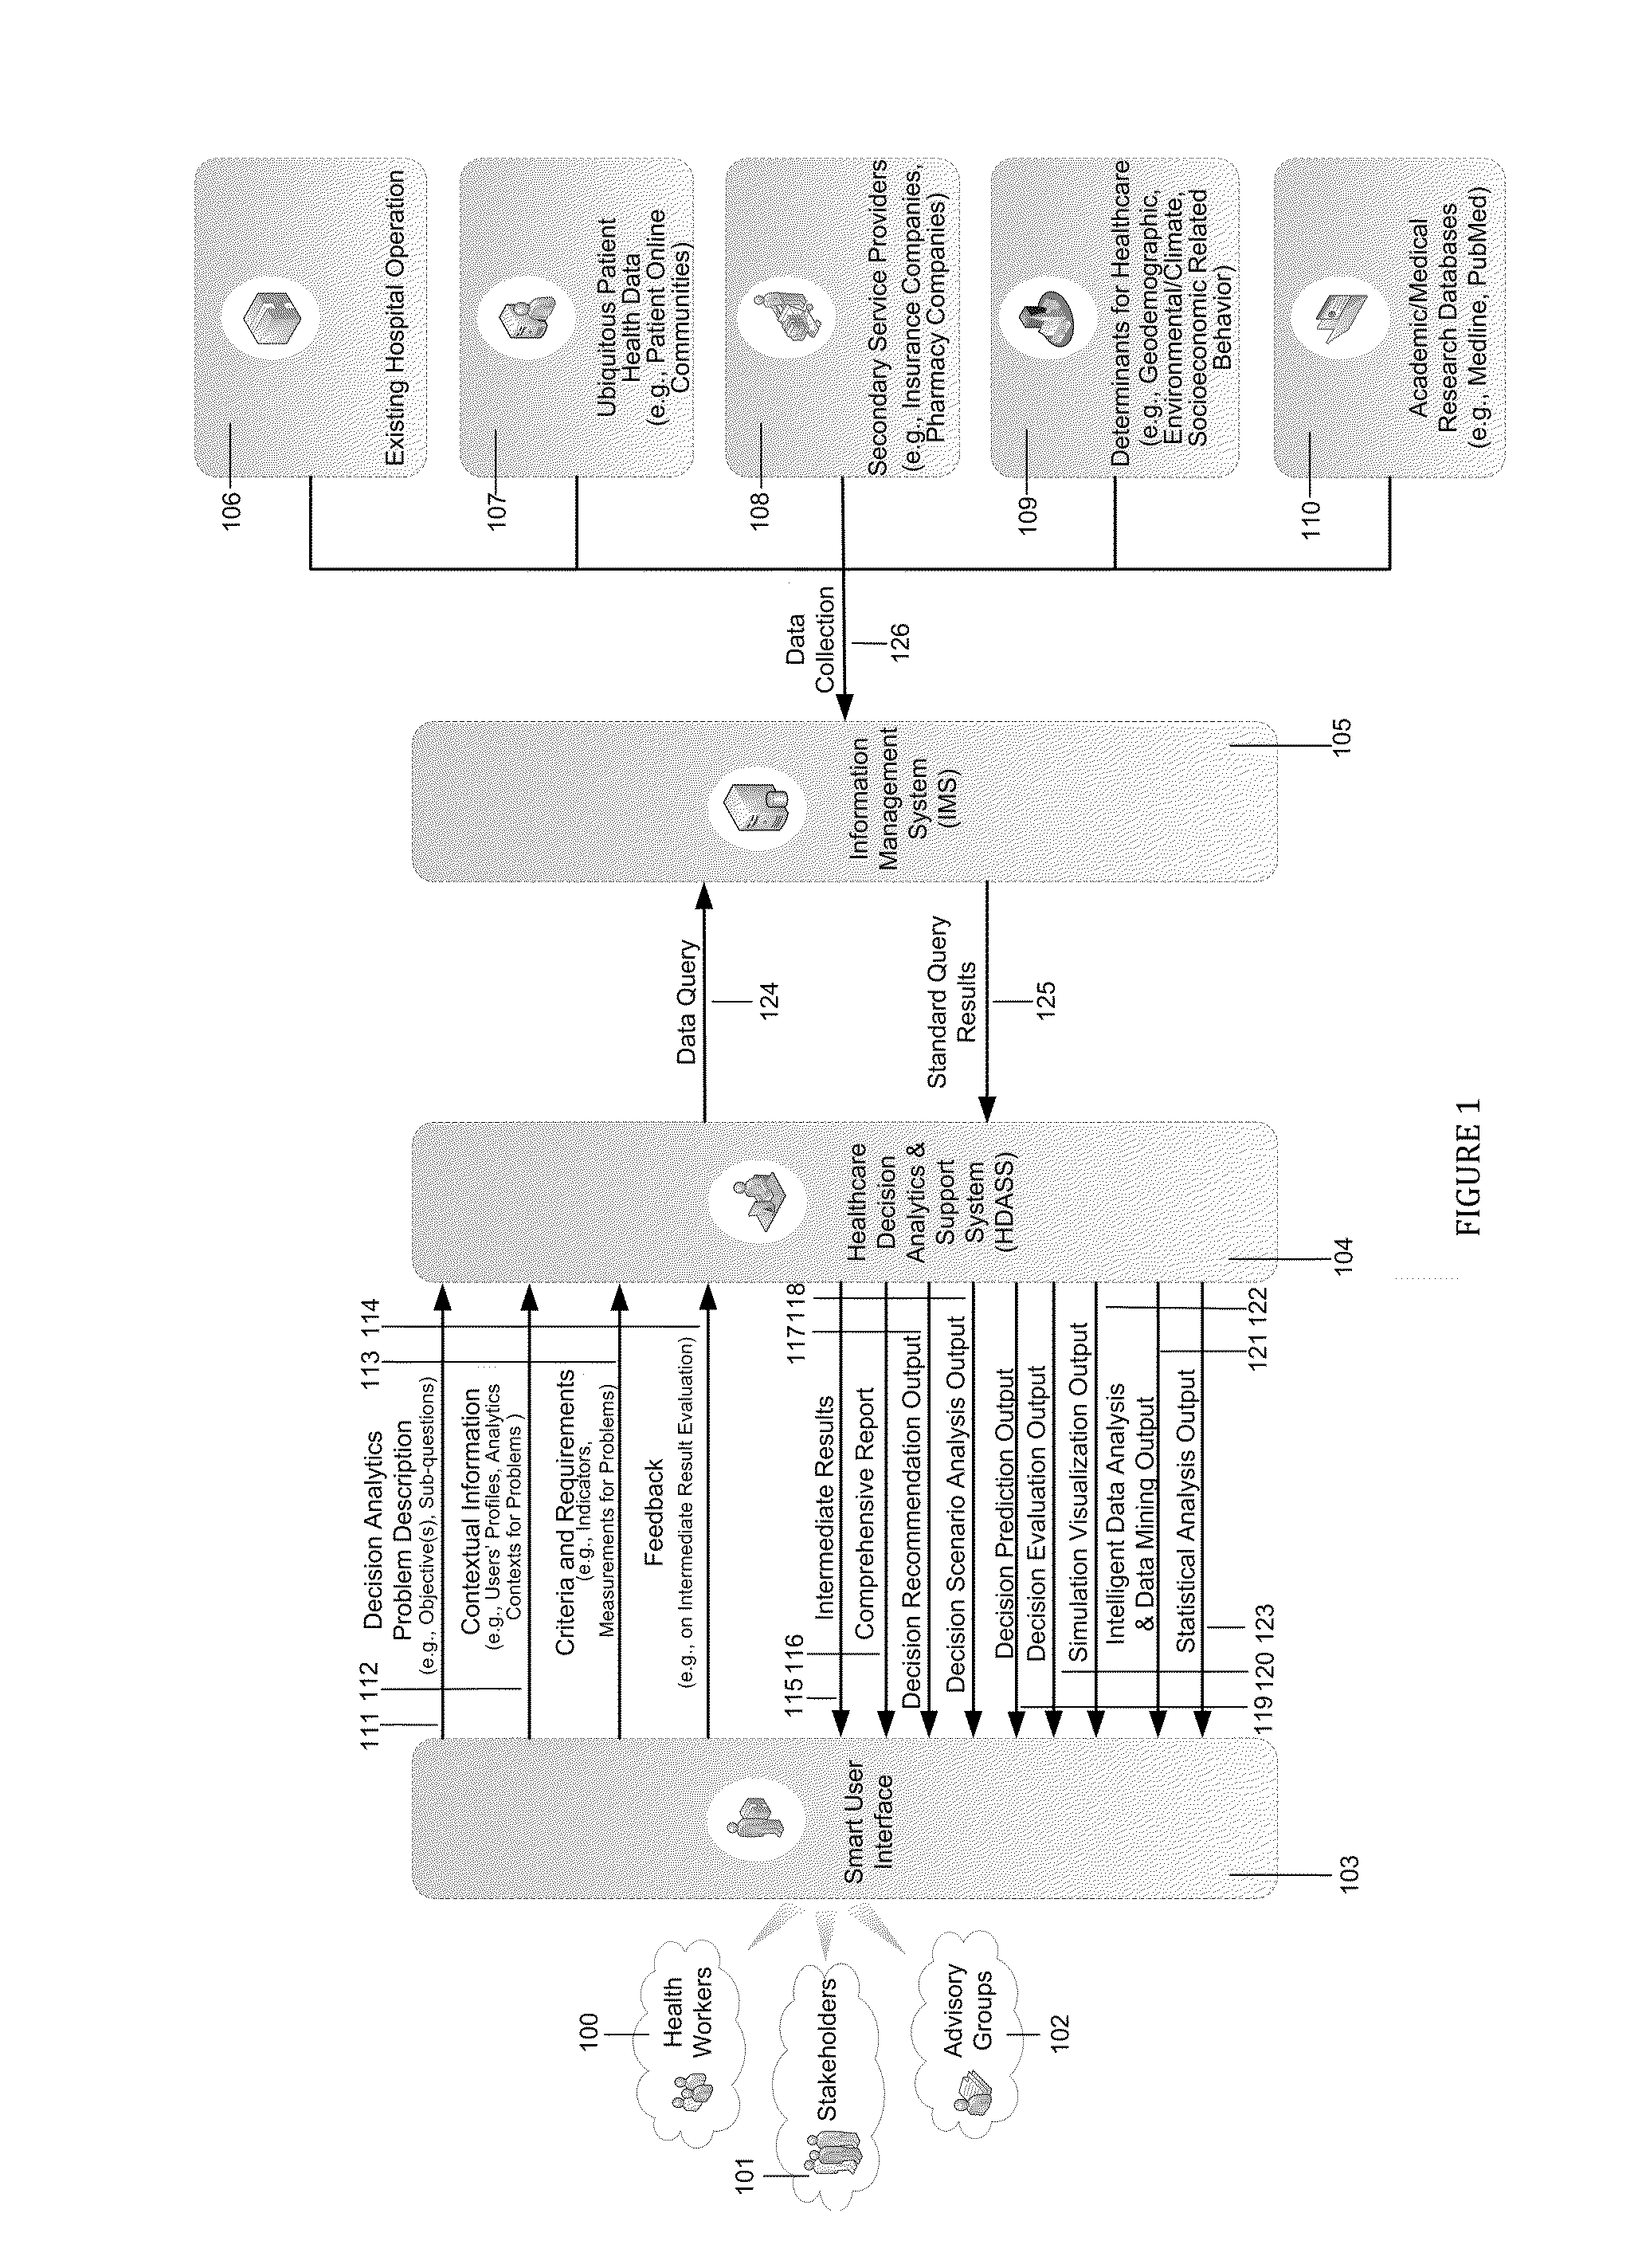 Methods and Apparatus for Smart Healthcare Decision Analytics and Support